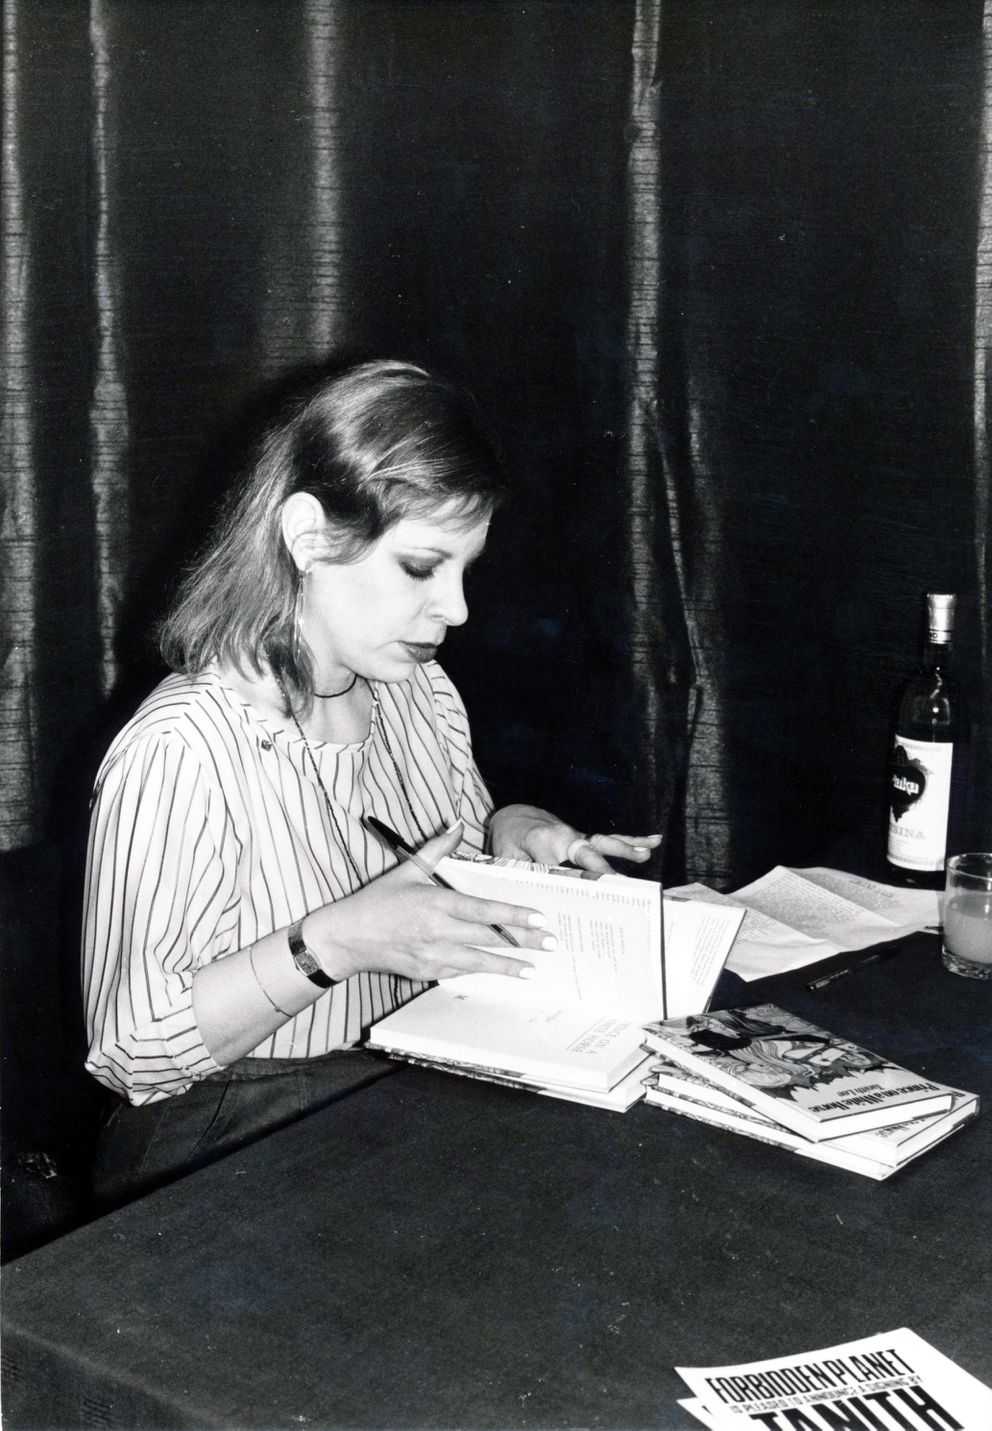 Forbidden Planet hosted a signing with fantasy writer Tanith Lee in 1979. The author of over 90 novels and 300 short stories, Tanith was autographing copies of her book The Castle of Dark.